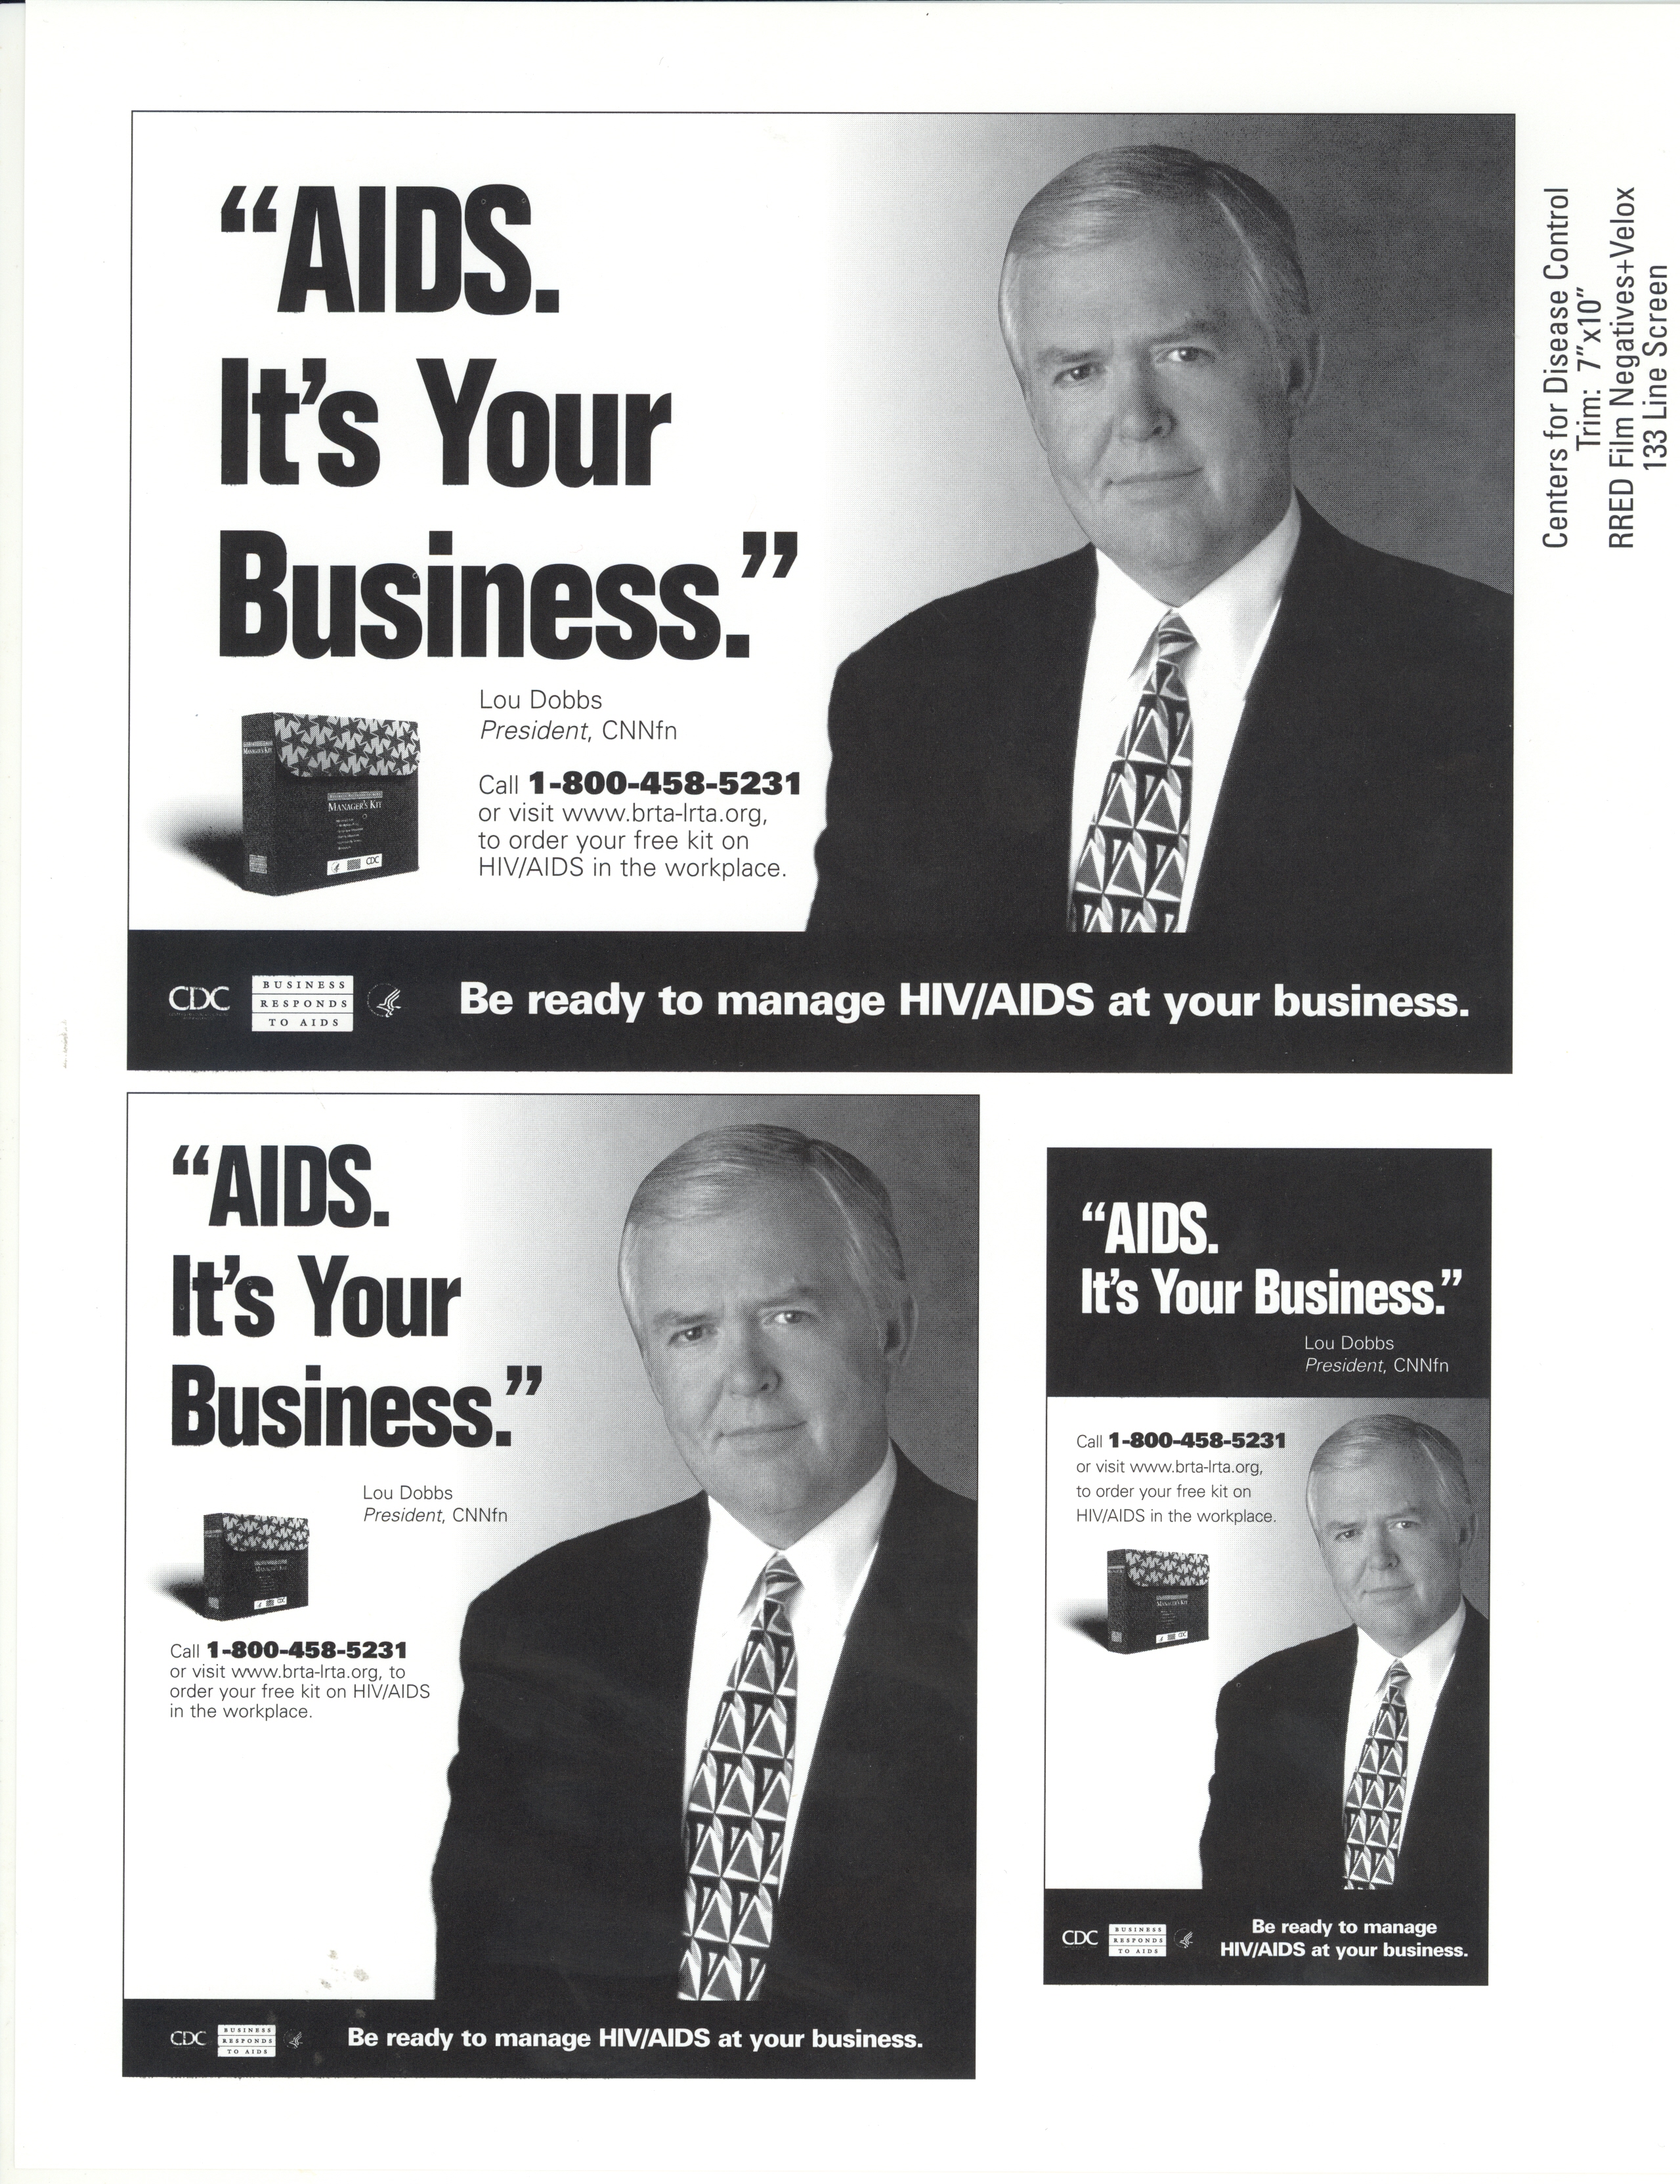 AIDS. It's your business.